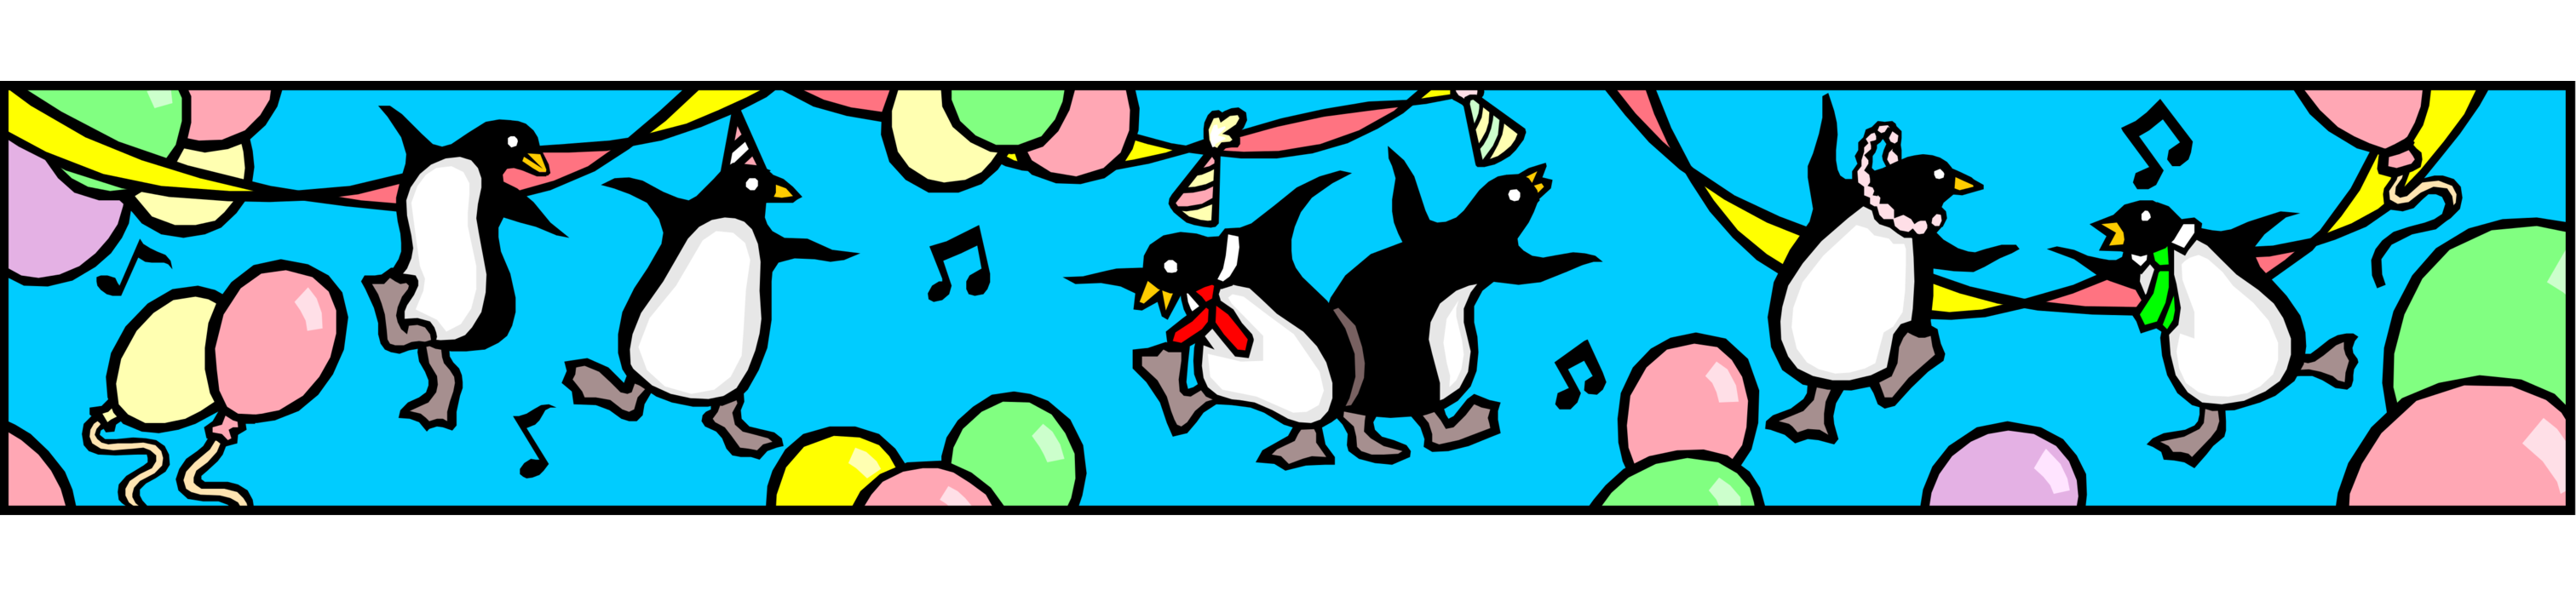 Vector Illustration of Party Penguins Celebrate with Ribbons and Balloons